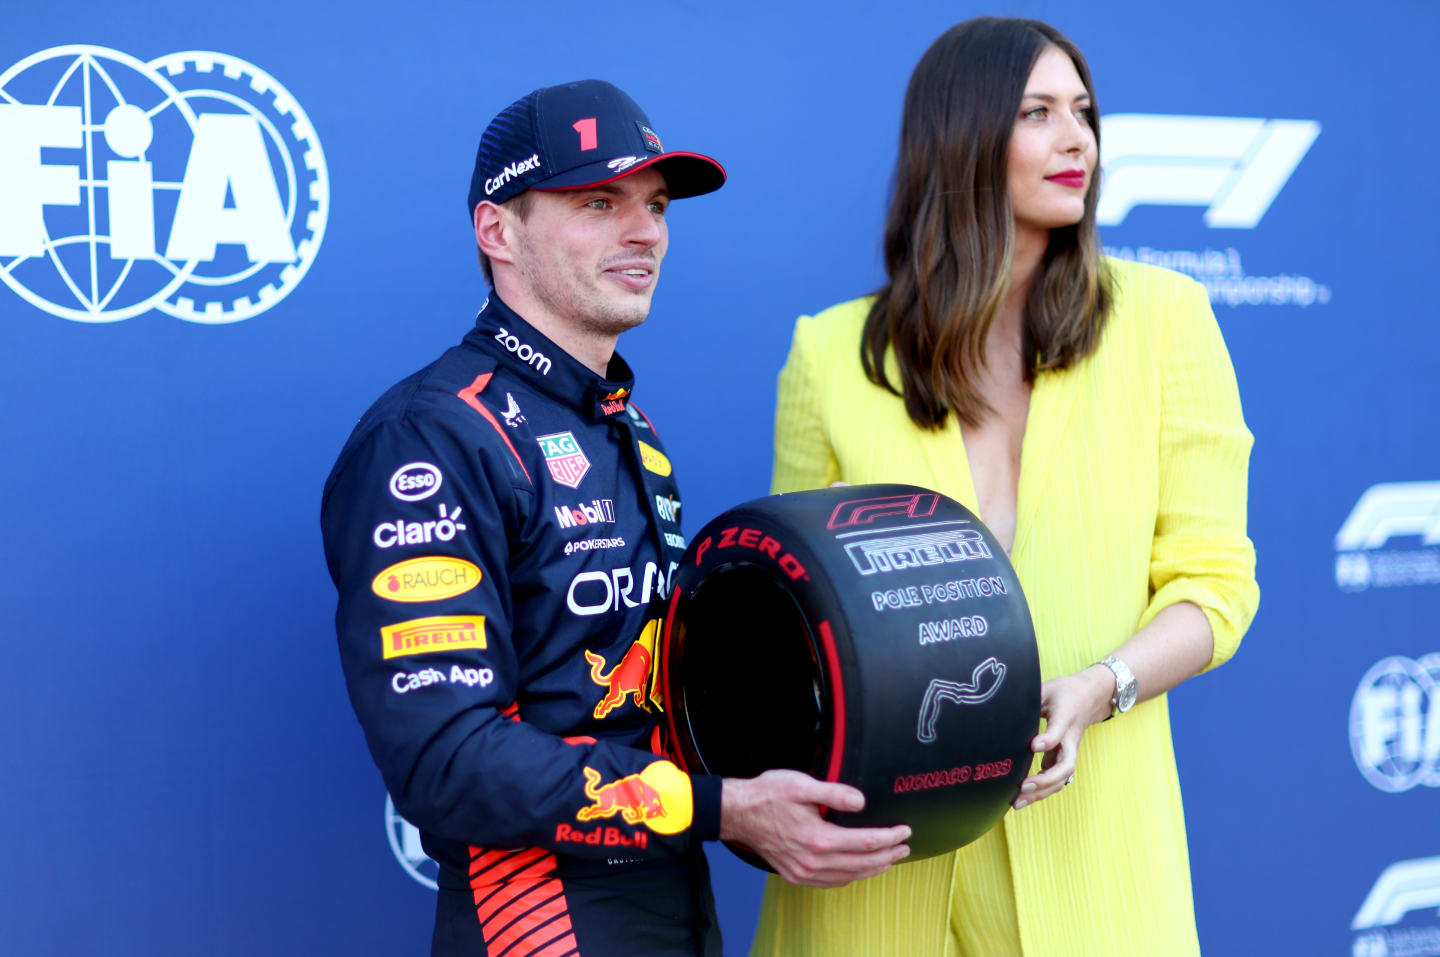 MONTE-CARLO, MONACO - MAY 27: Pole position qualifier Max Verstappen of the Netherlands and Oracle Red Bull Racing is presented with the Pirelli Pole Position Award by Maria Sharapova during qualifying ahead of the F1 Grand Prix of Monaco at Circuit de Monaco on May 27, 2023 in Monte-Carlo, Monaco. (Photo by Dan Istitene - Formula 1/Formula 1 via Getty Images)